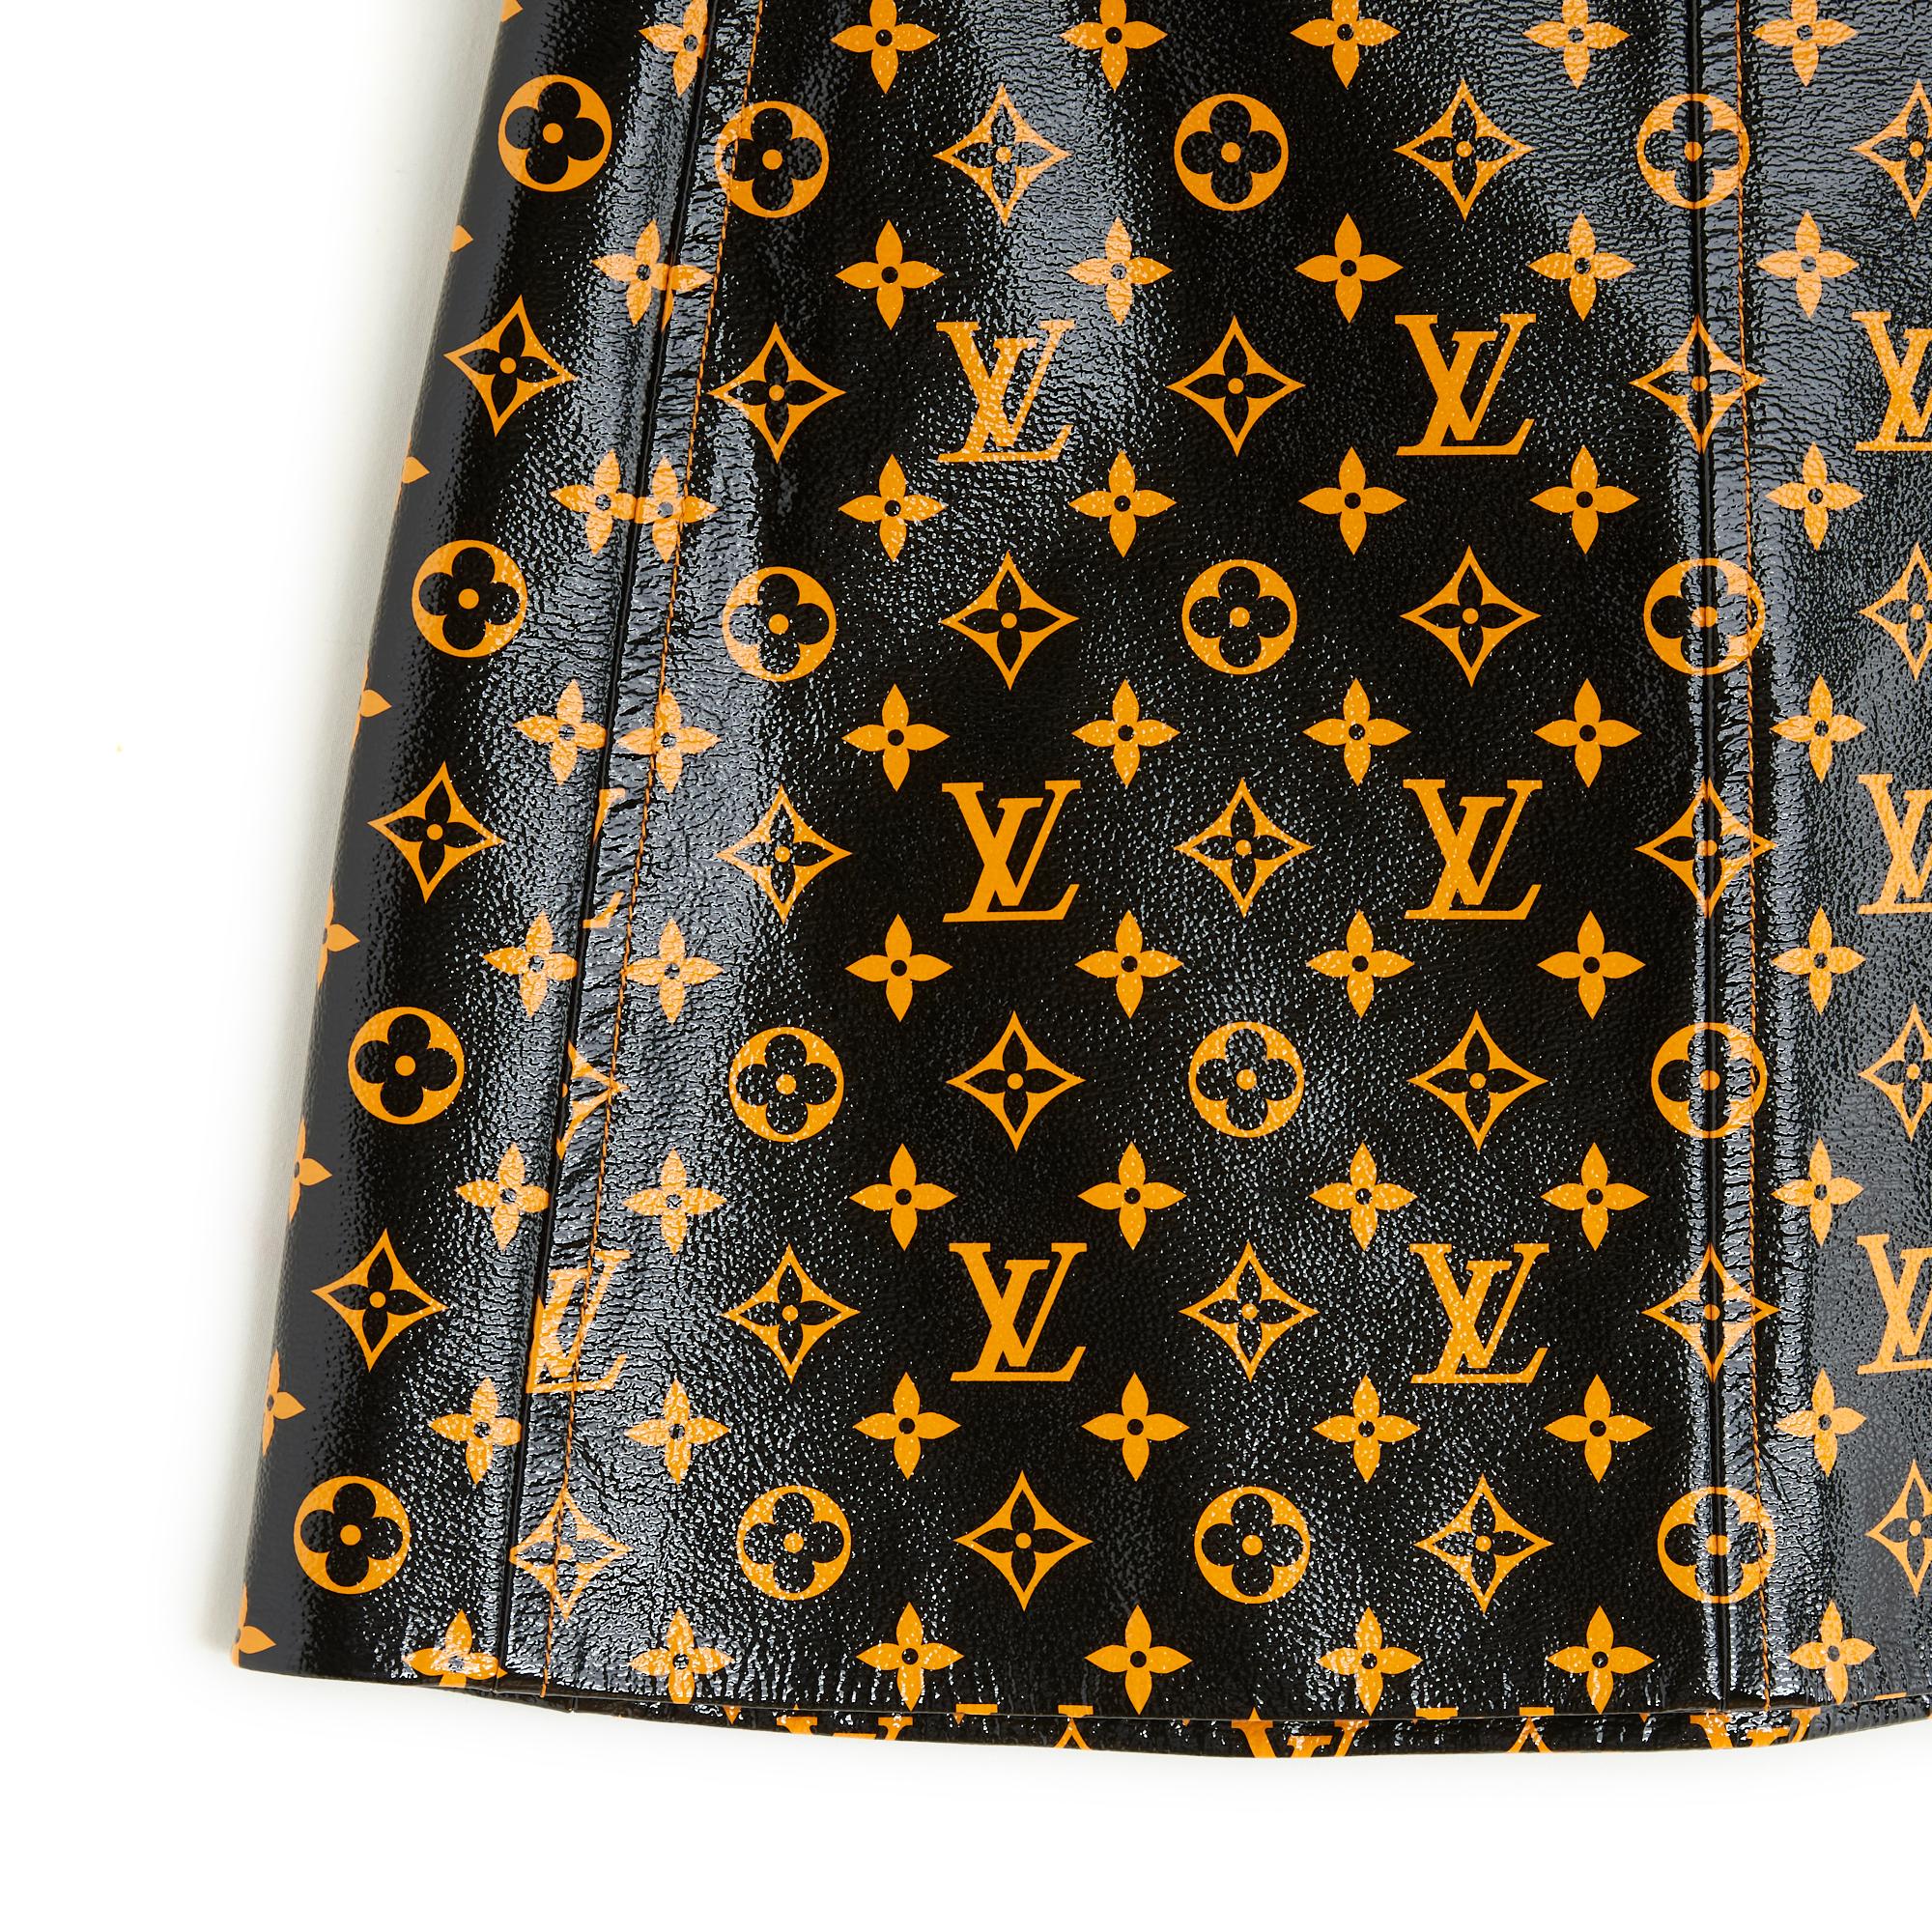 Short Louis Vuitton skirt in black patent leather with contrasting orange LV Initials pattern, orange-yellow satin canvas lining, fastening with a large logo zip at the back. Size 38FR: waist 38 cm, length 43 cm. The skirt comes from private sales,